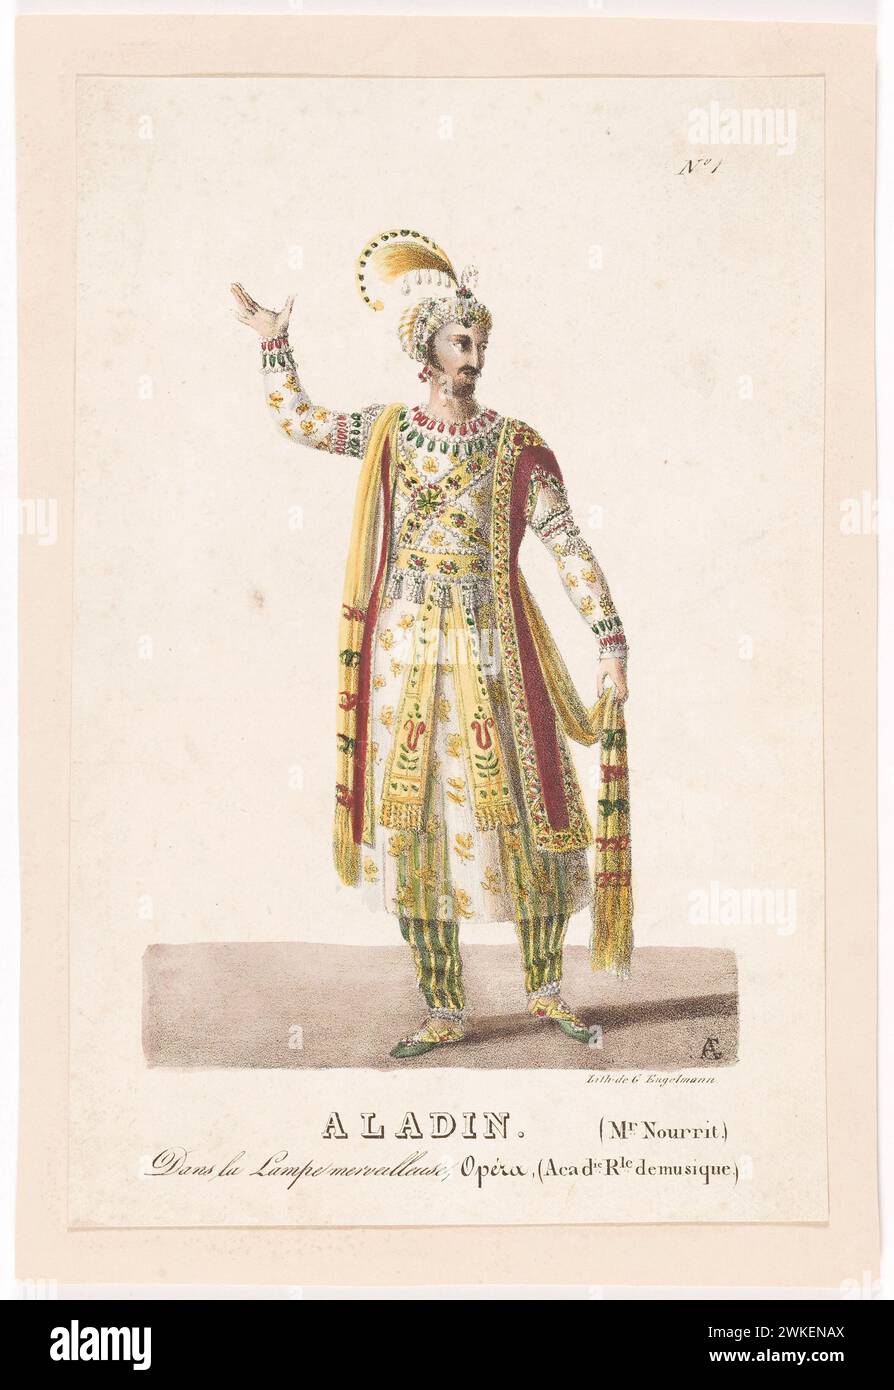 Costume design for the Opera 'Aladin, ou La Lampe merveilleuse' by Nicolas Isouard. Museum: PRIVATE COLLECTION. Author: AUGUSTE GARNERAY. Stock Photo